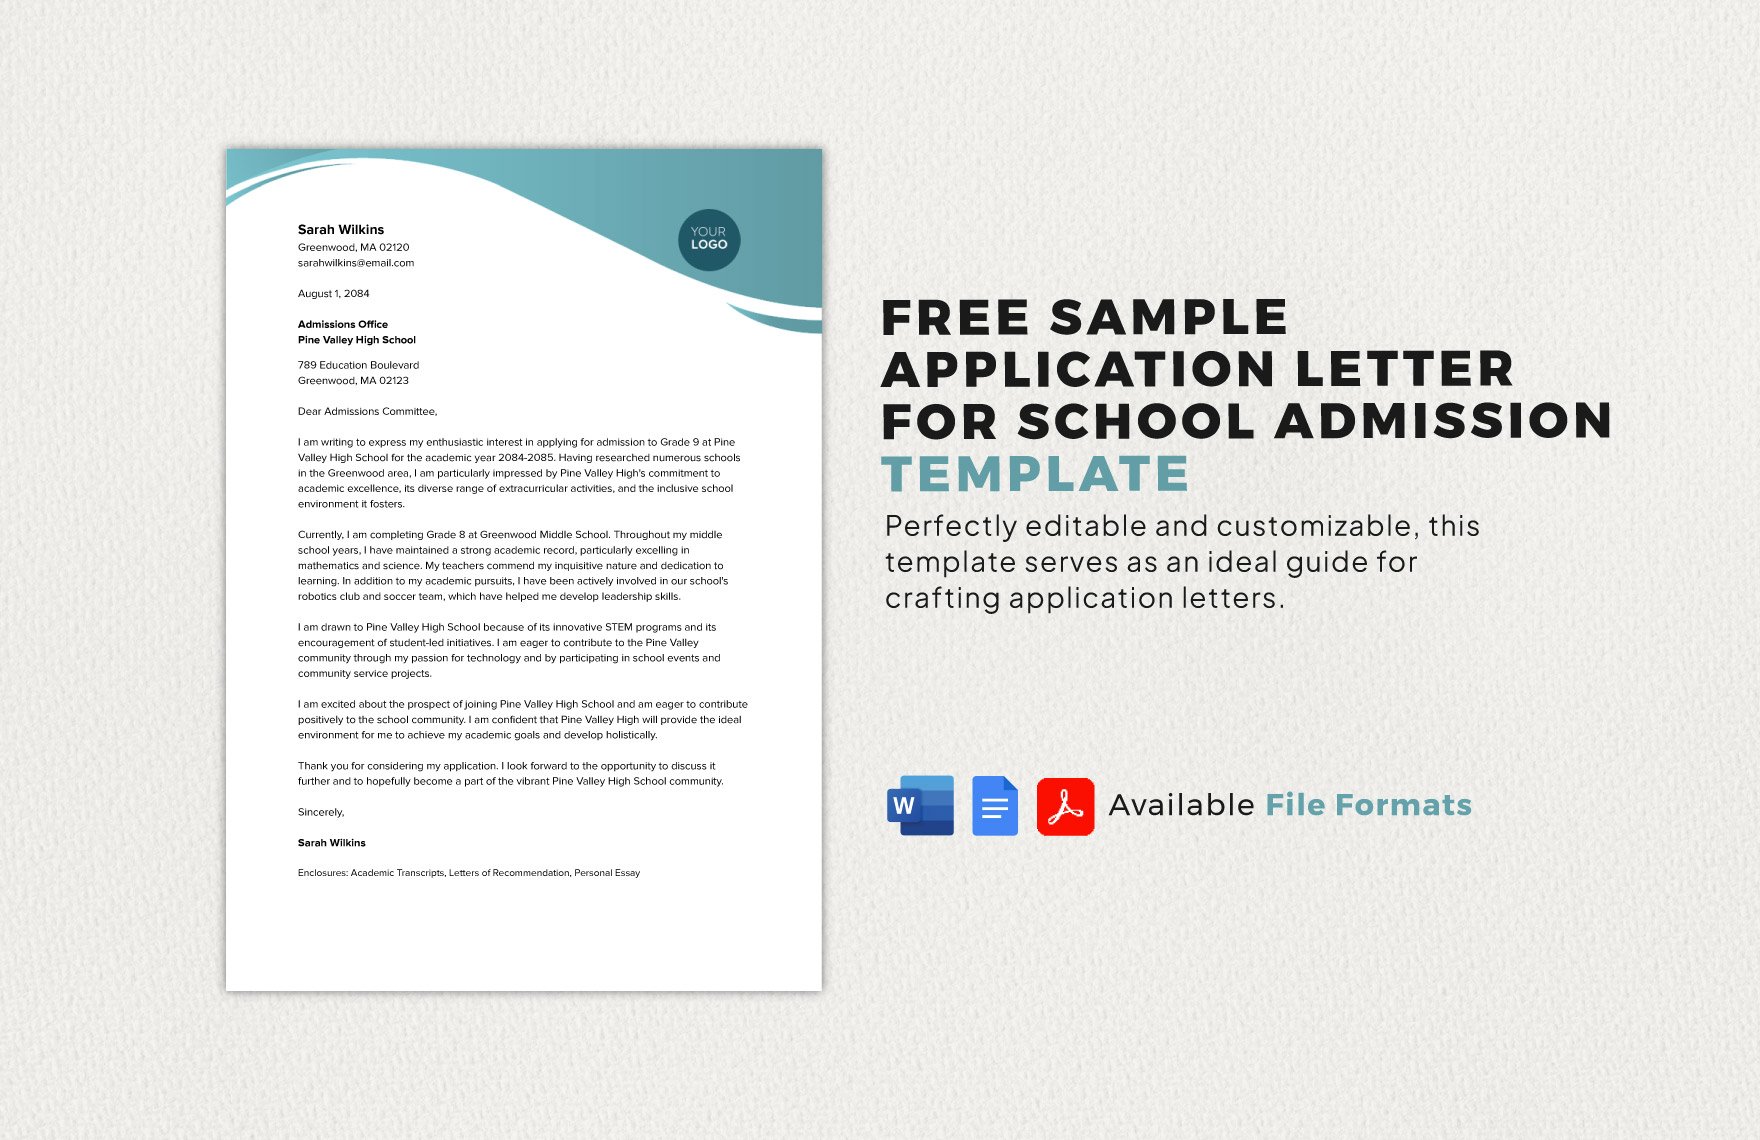 Sample Application Letter for School Admission Template